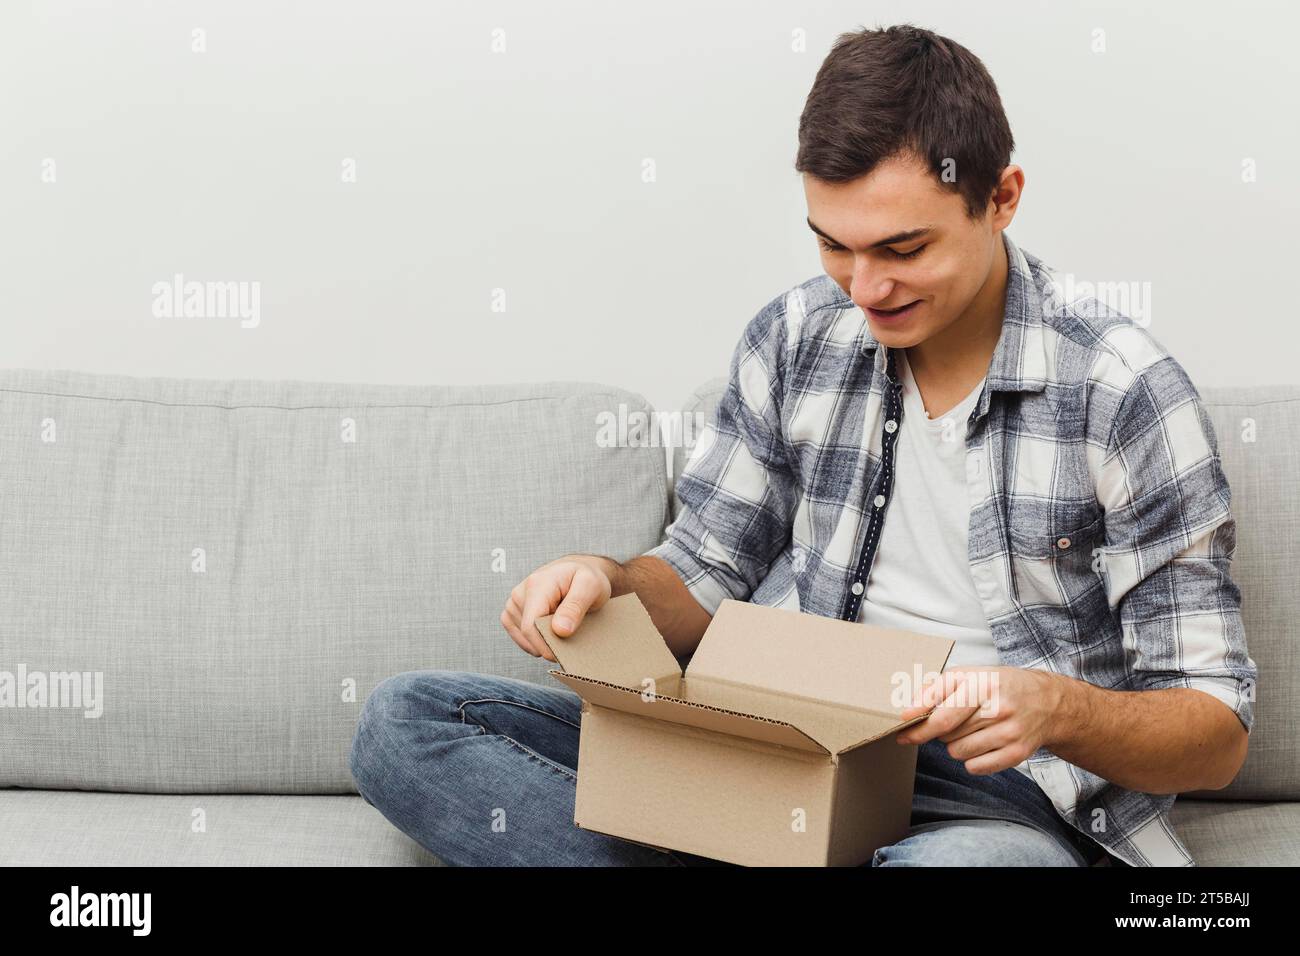 High angle man couch opening box Stock Photo